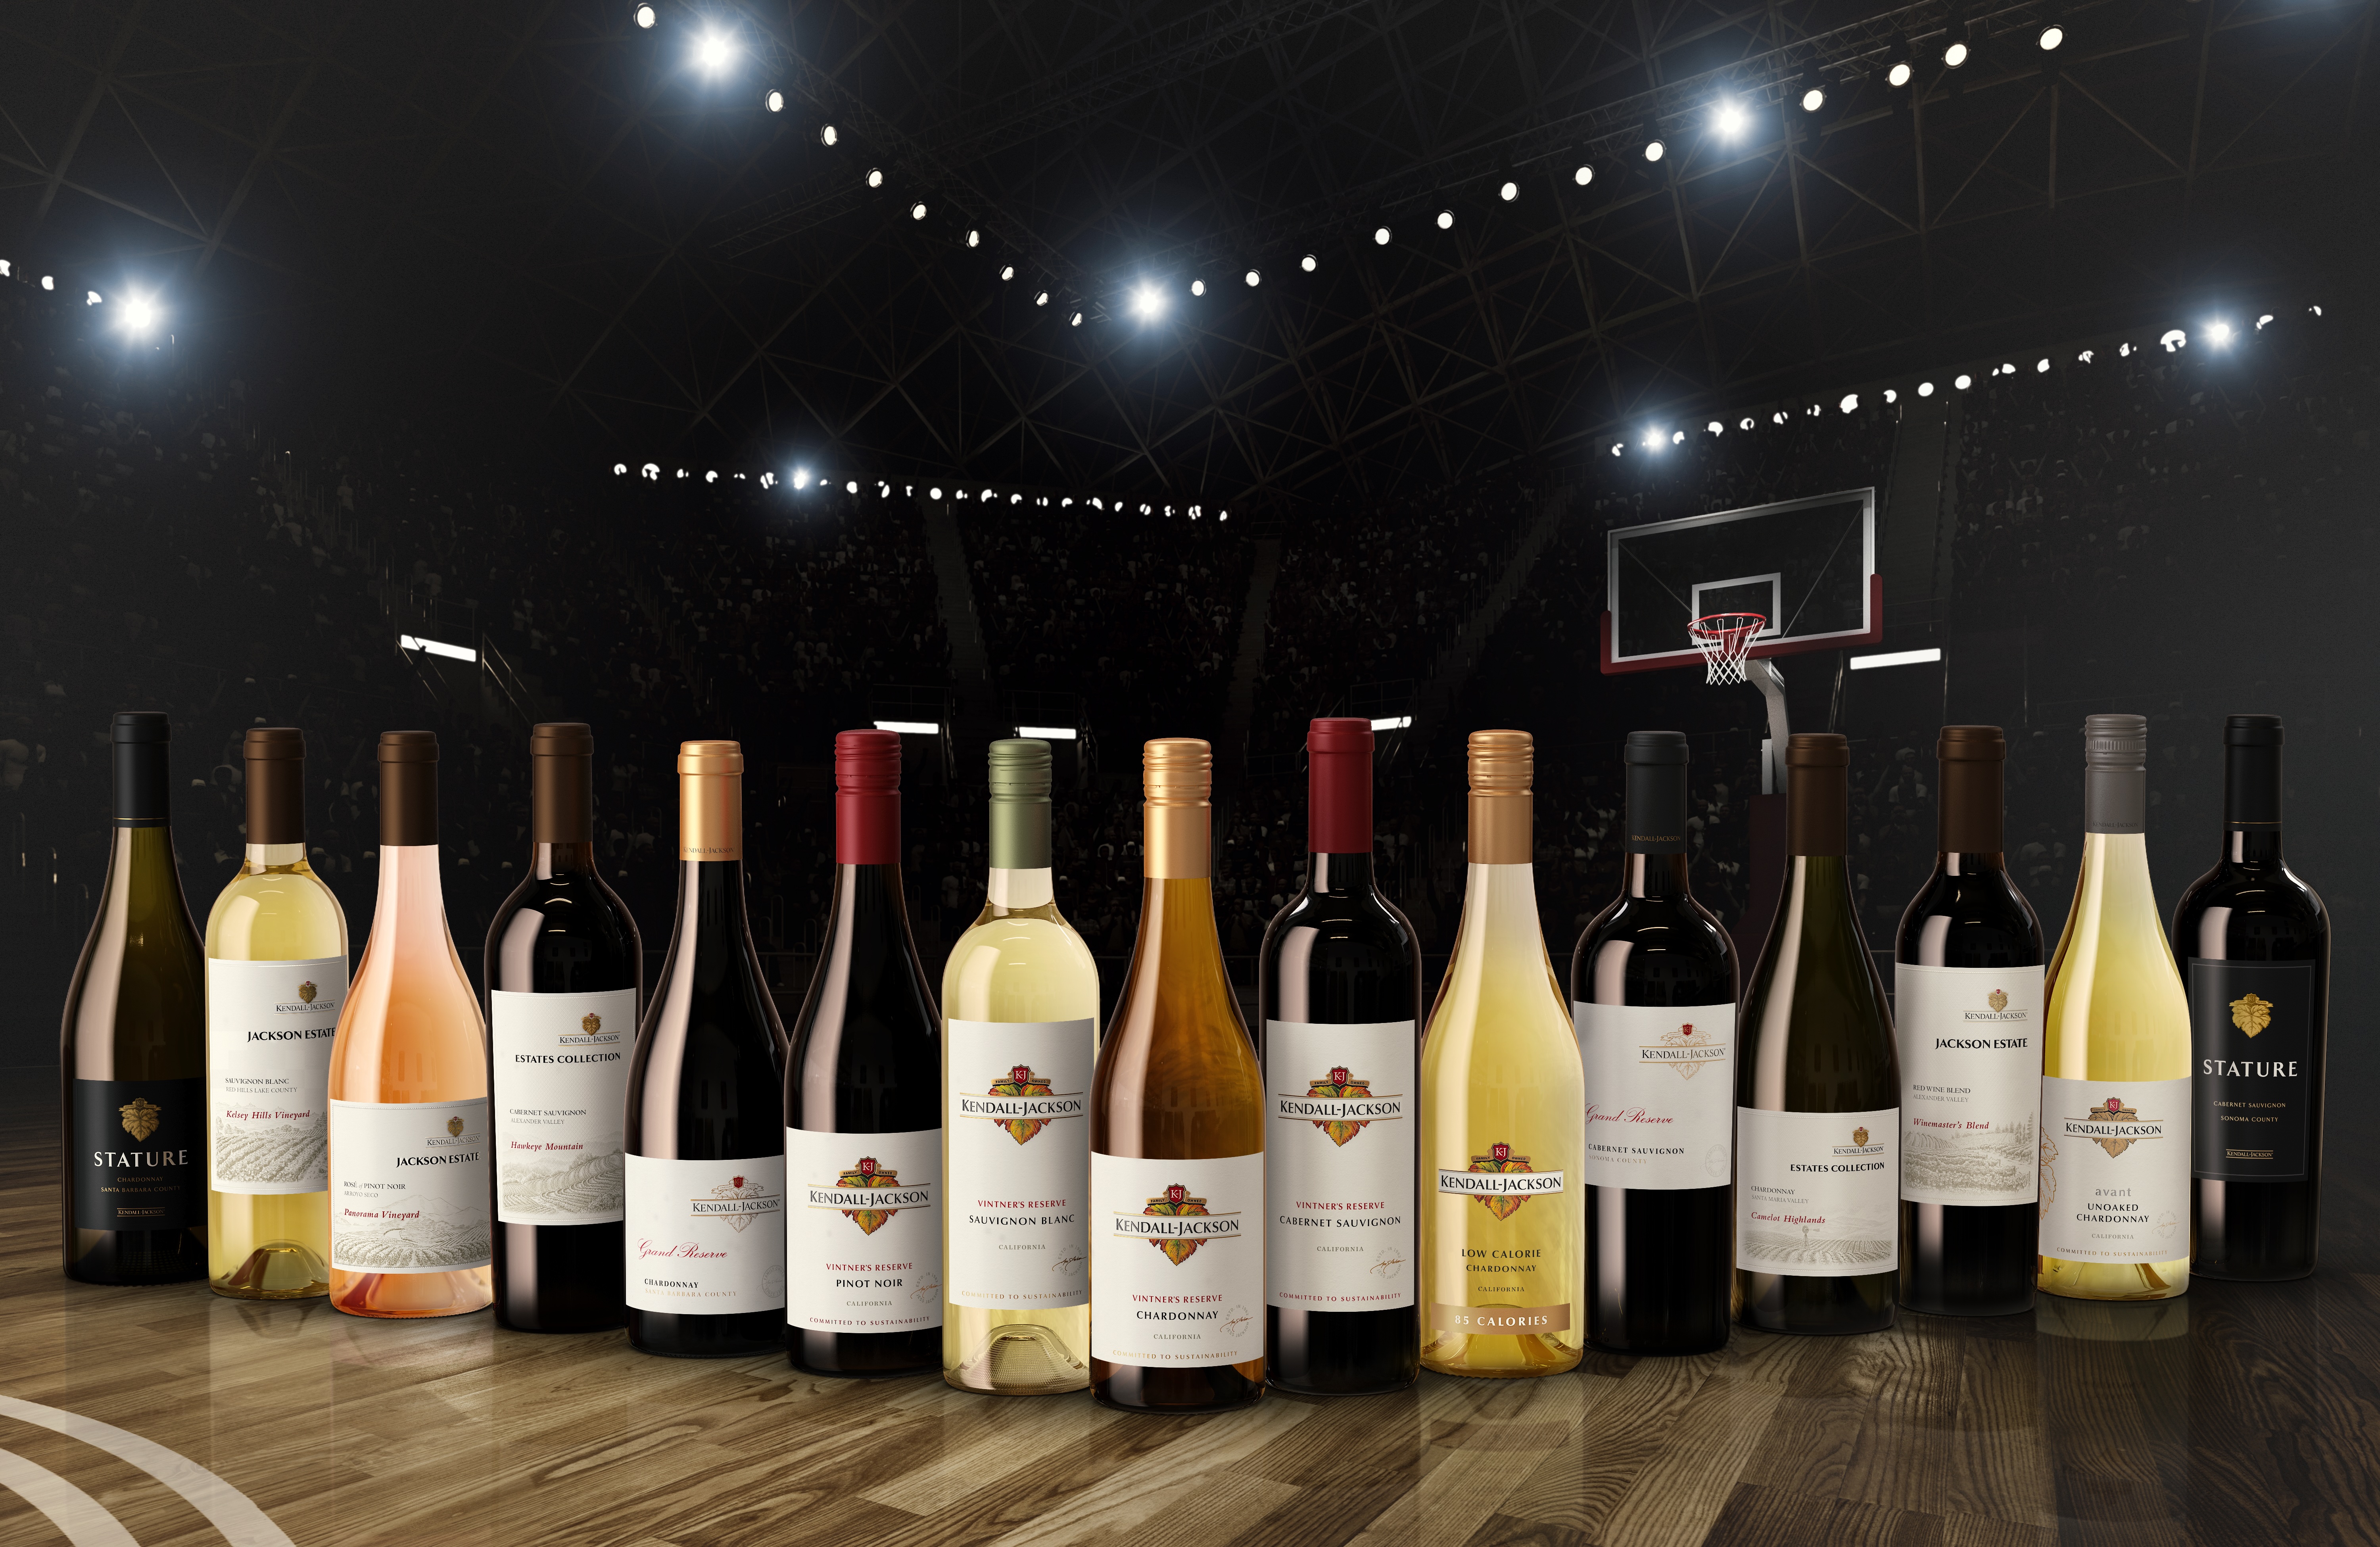 Kendall-Jackson Wines | Official Wine Partner of the NBA